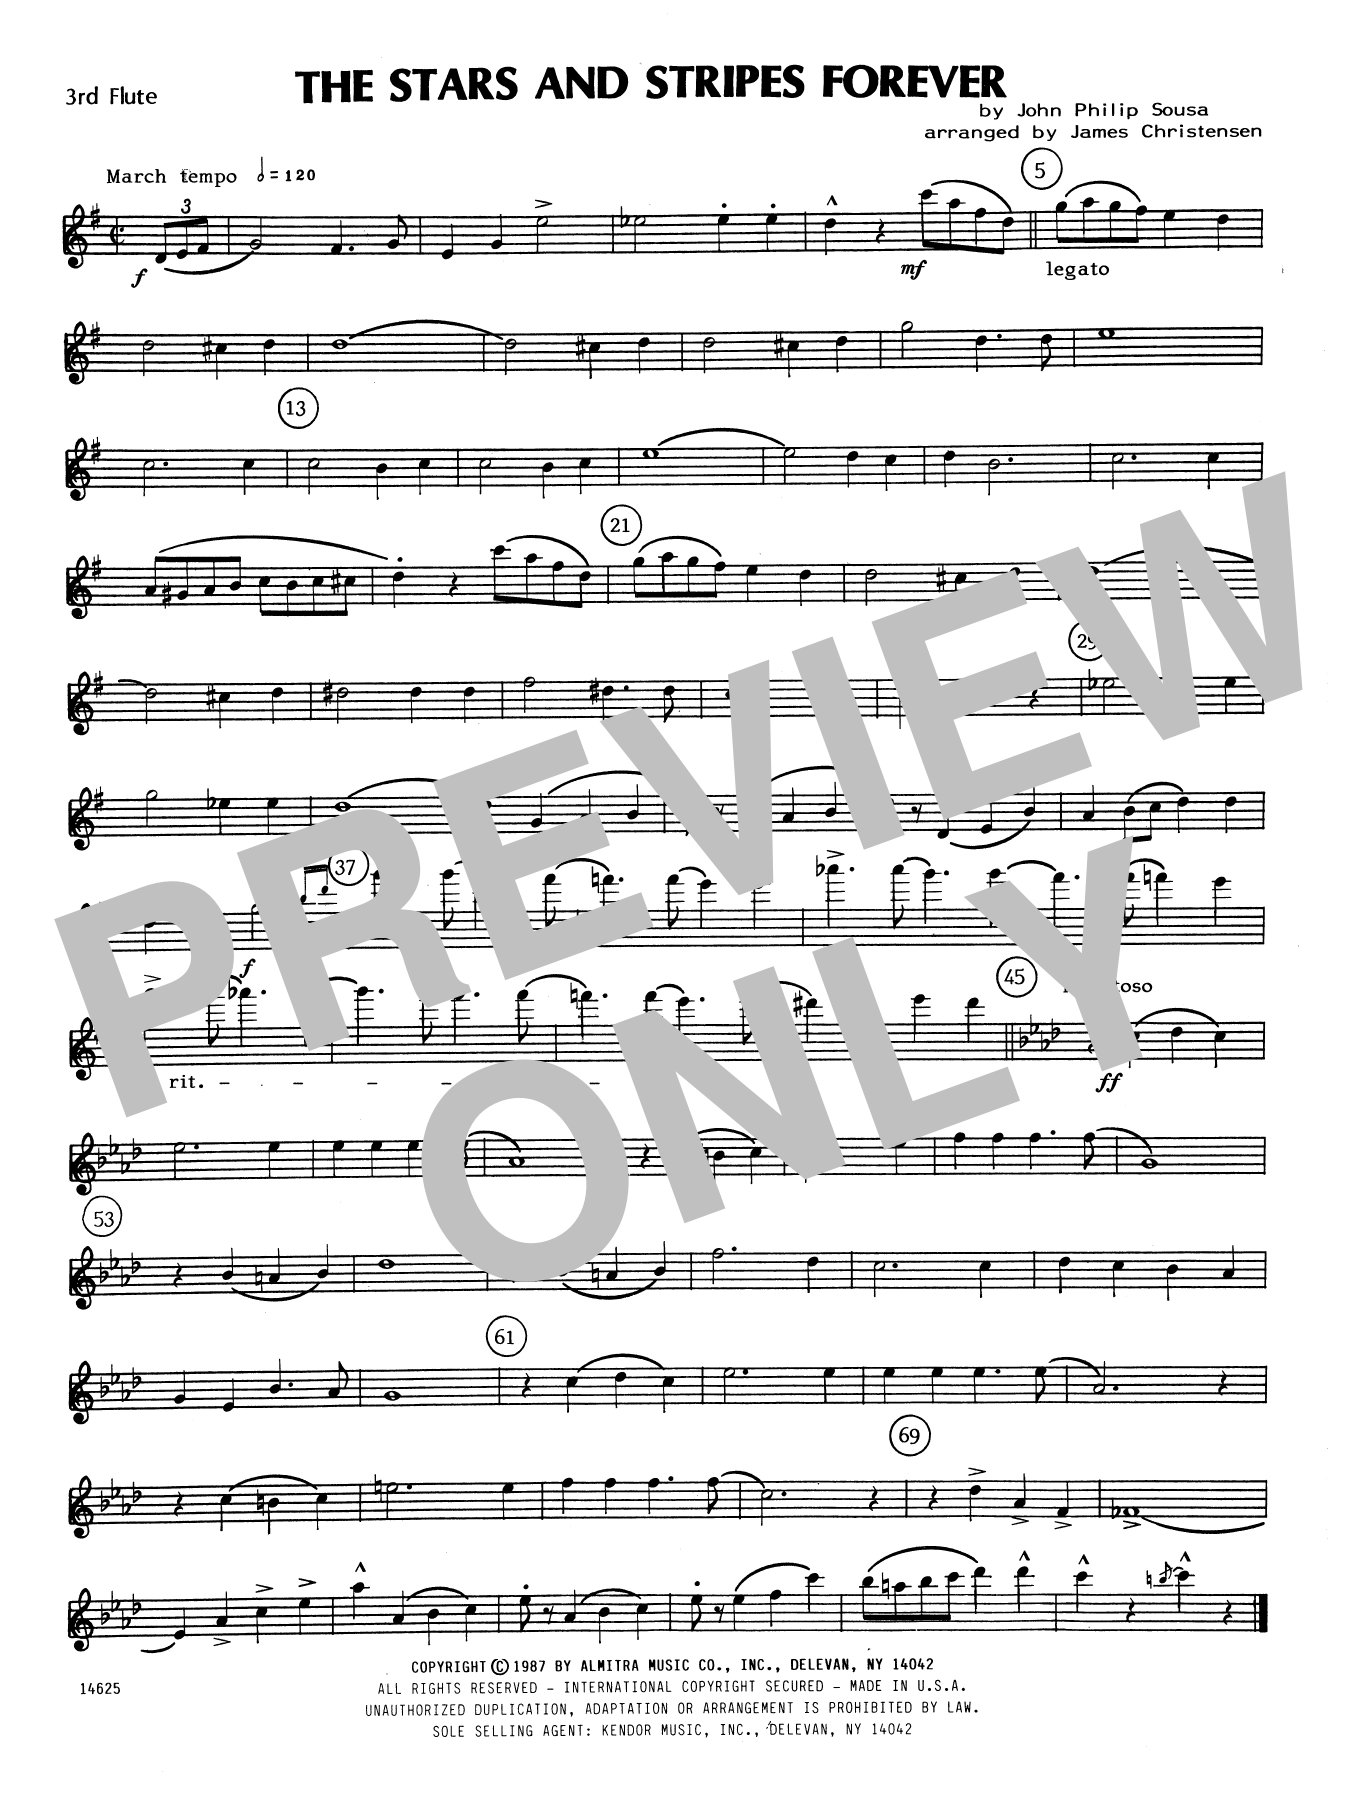 Download James Christensen The Stars and Stripes Forever - 3rd C F Sheet Music